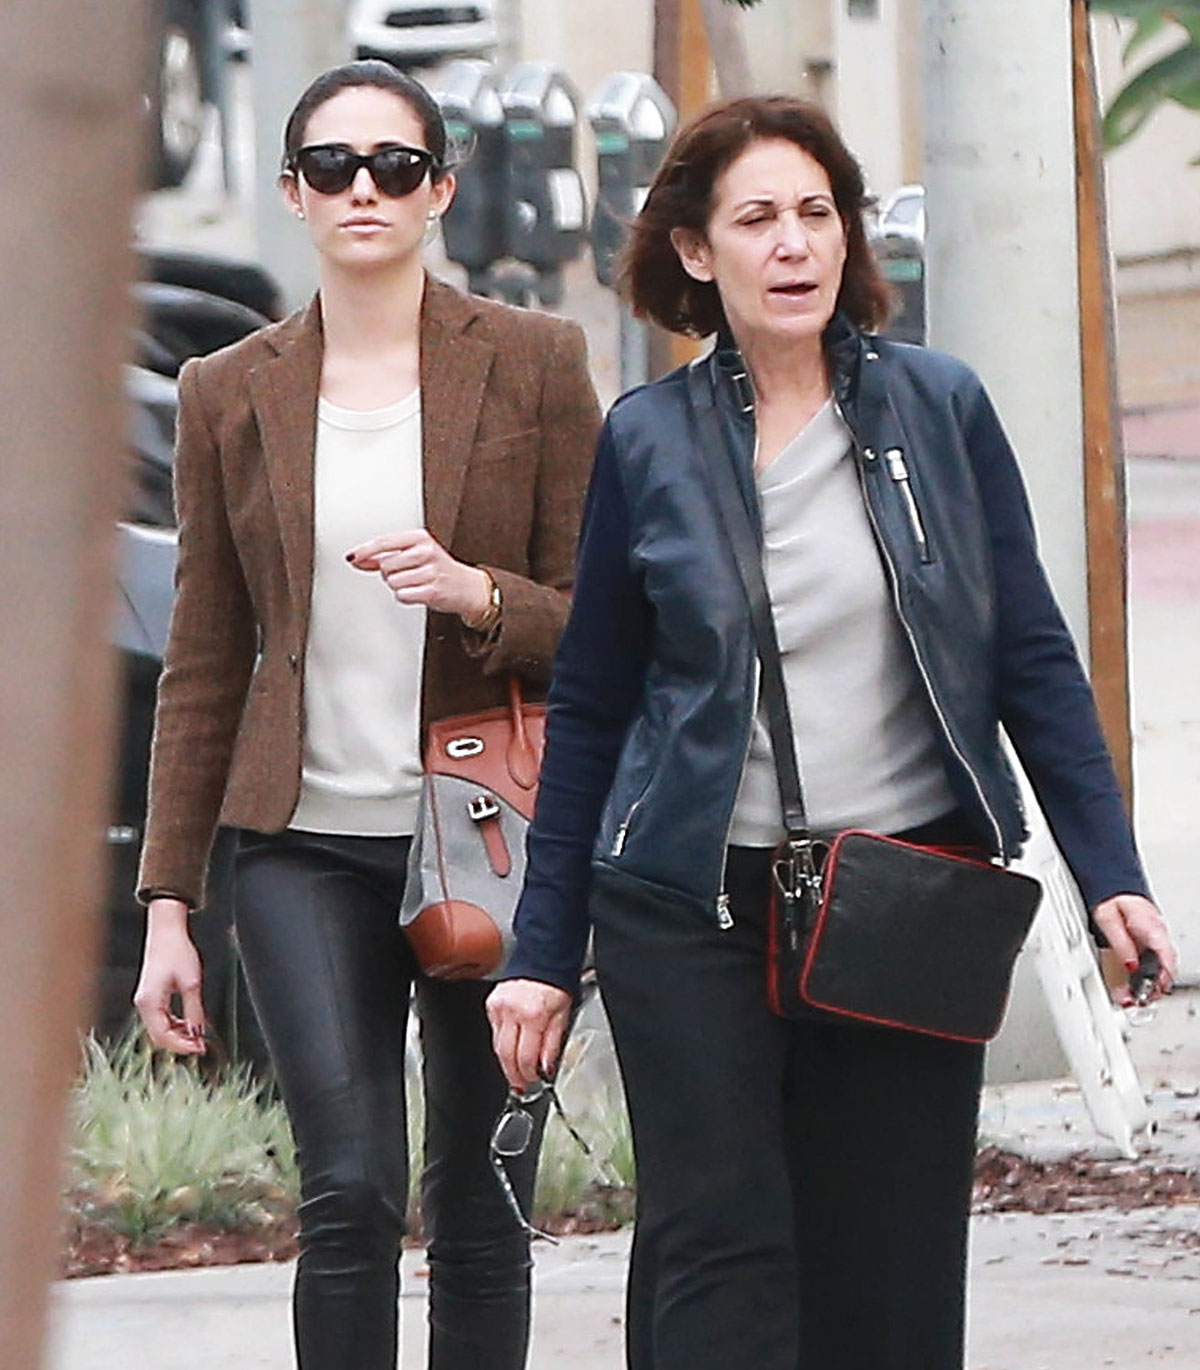 Emmy Rossum out & about in LA